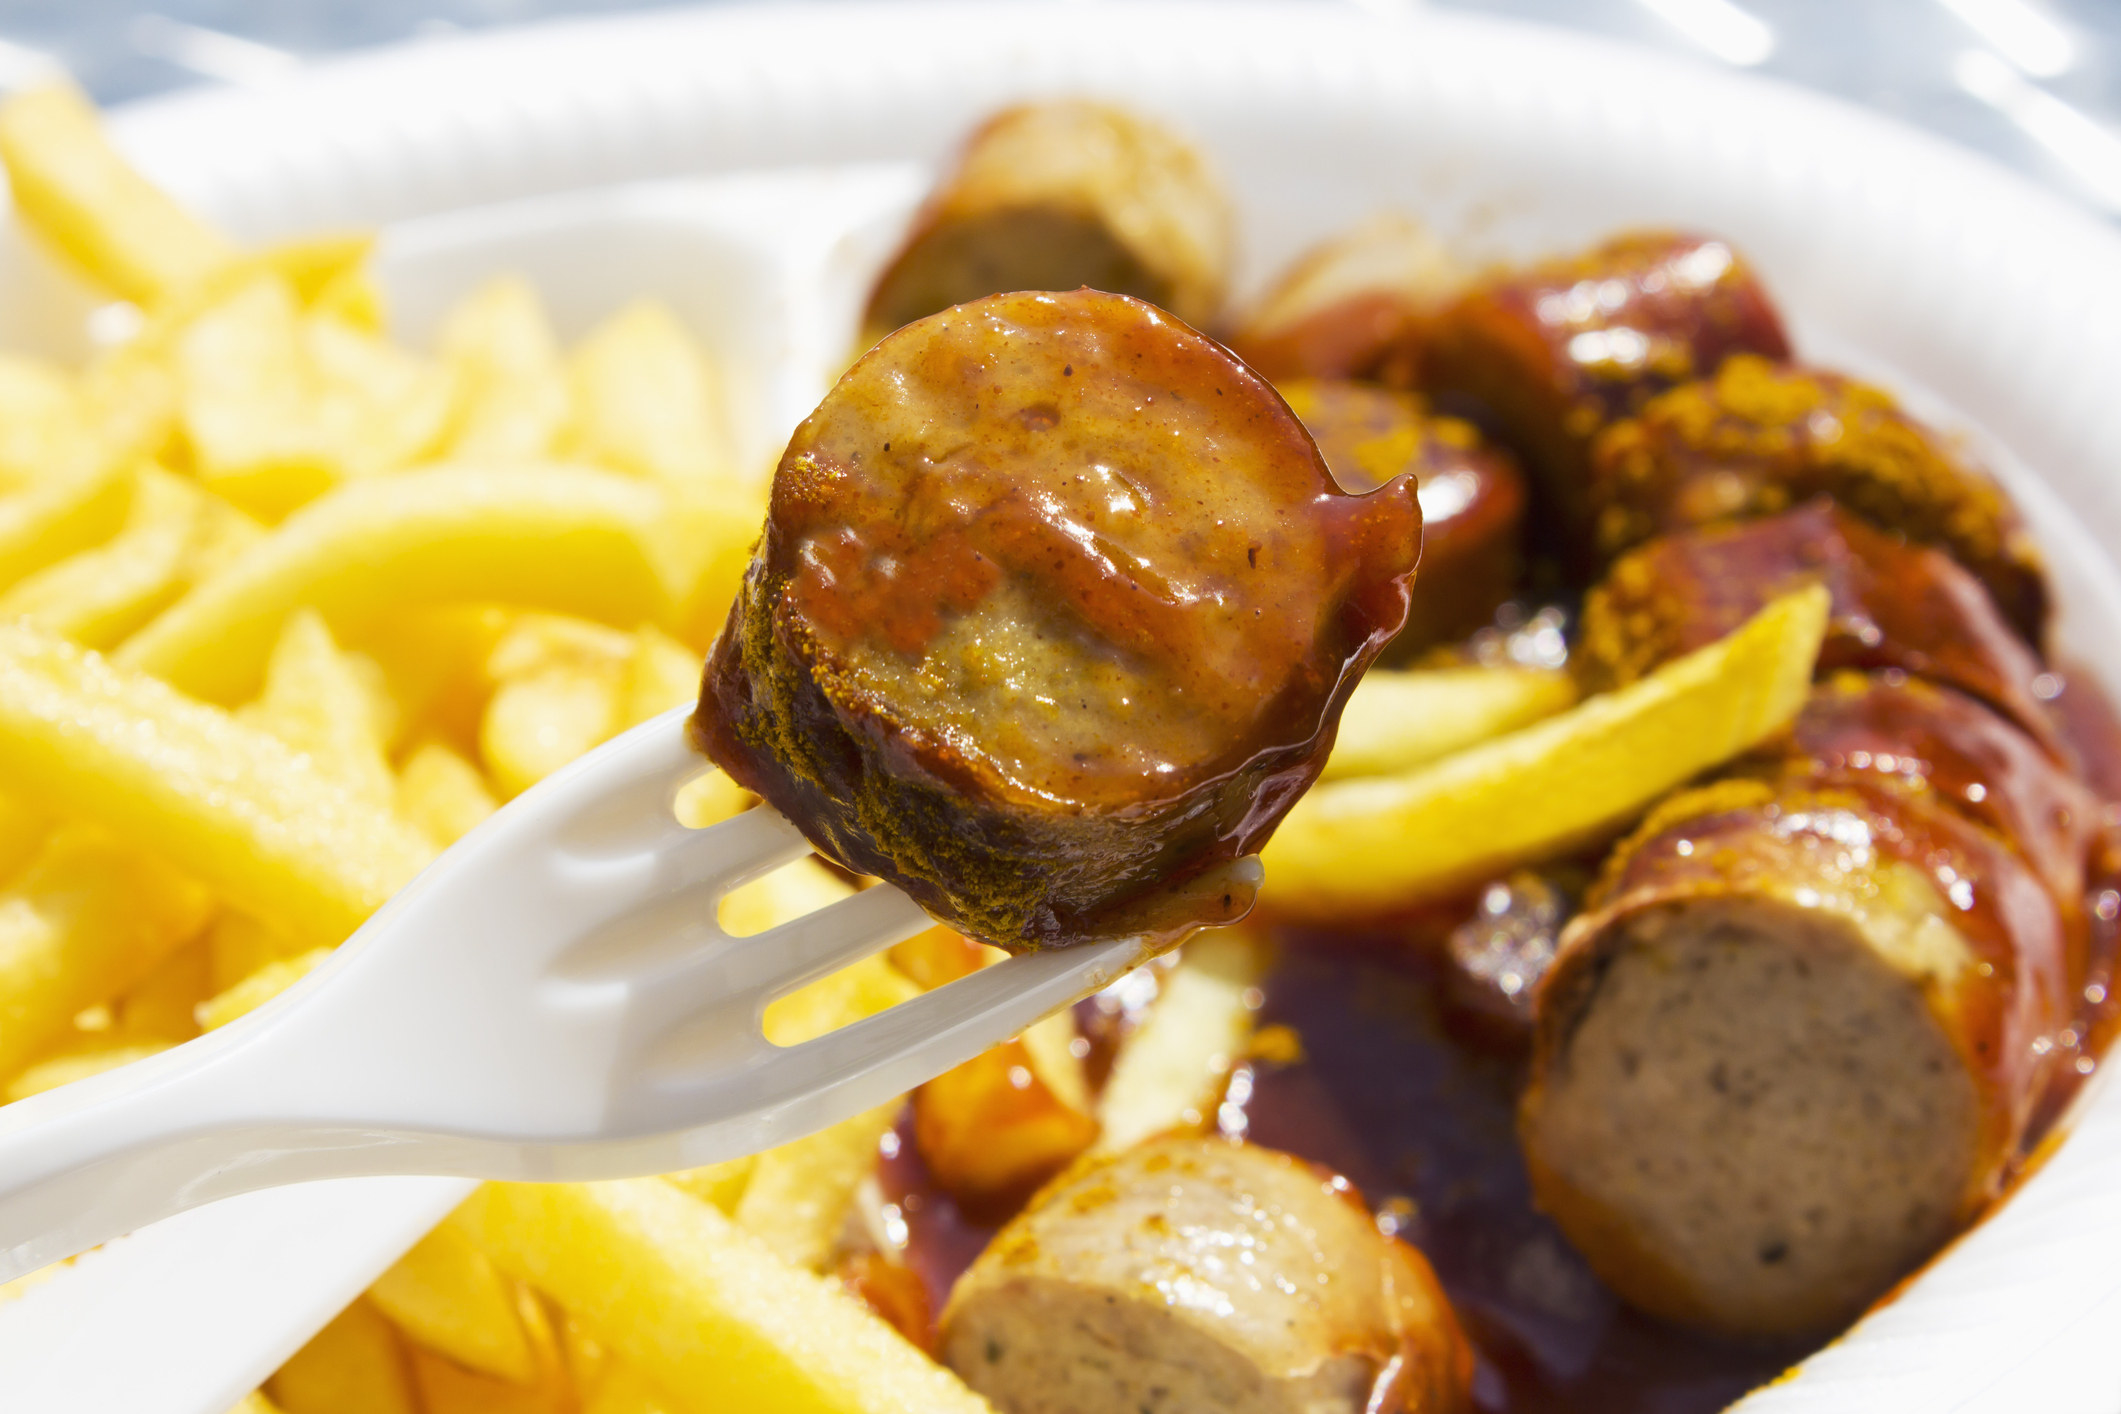 Curry sausage on a fork with french fries in the background